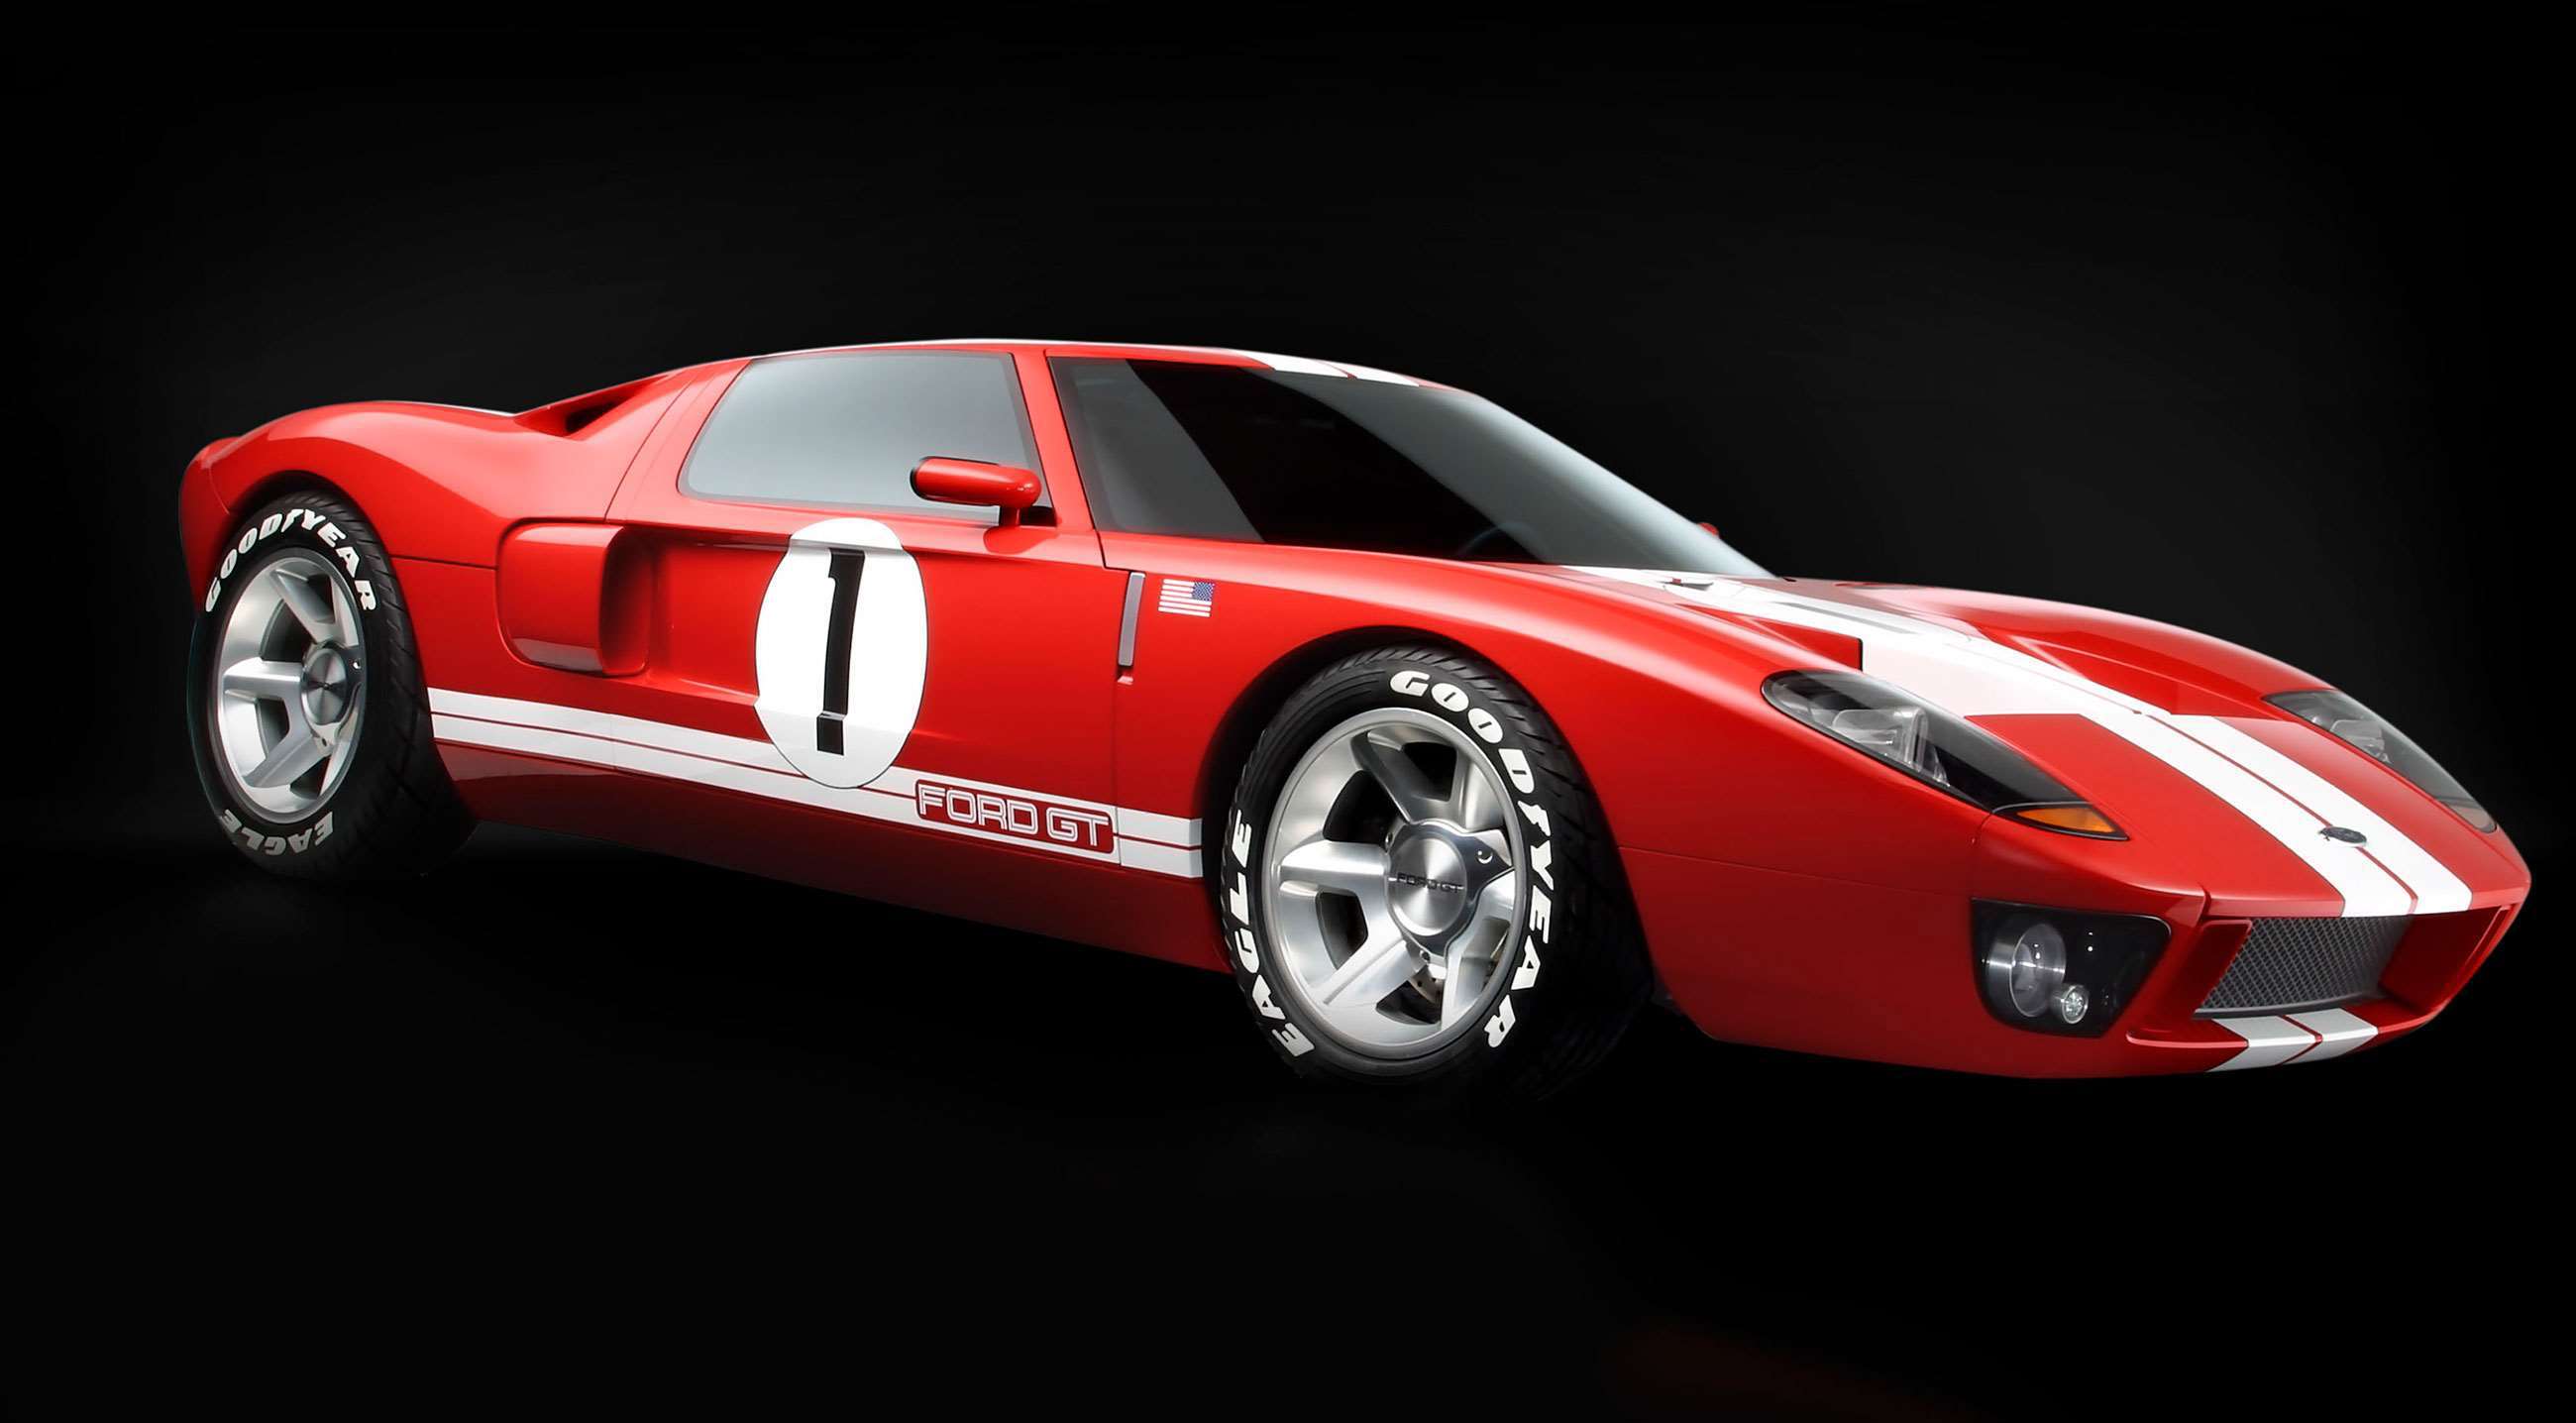 best-retro-concepts-10-ford-gt-concept-goodwood-10052021.jpg